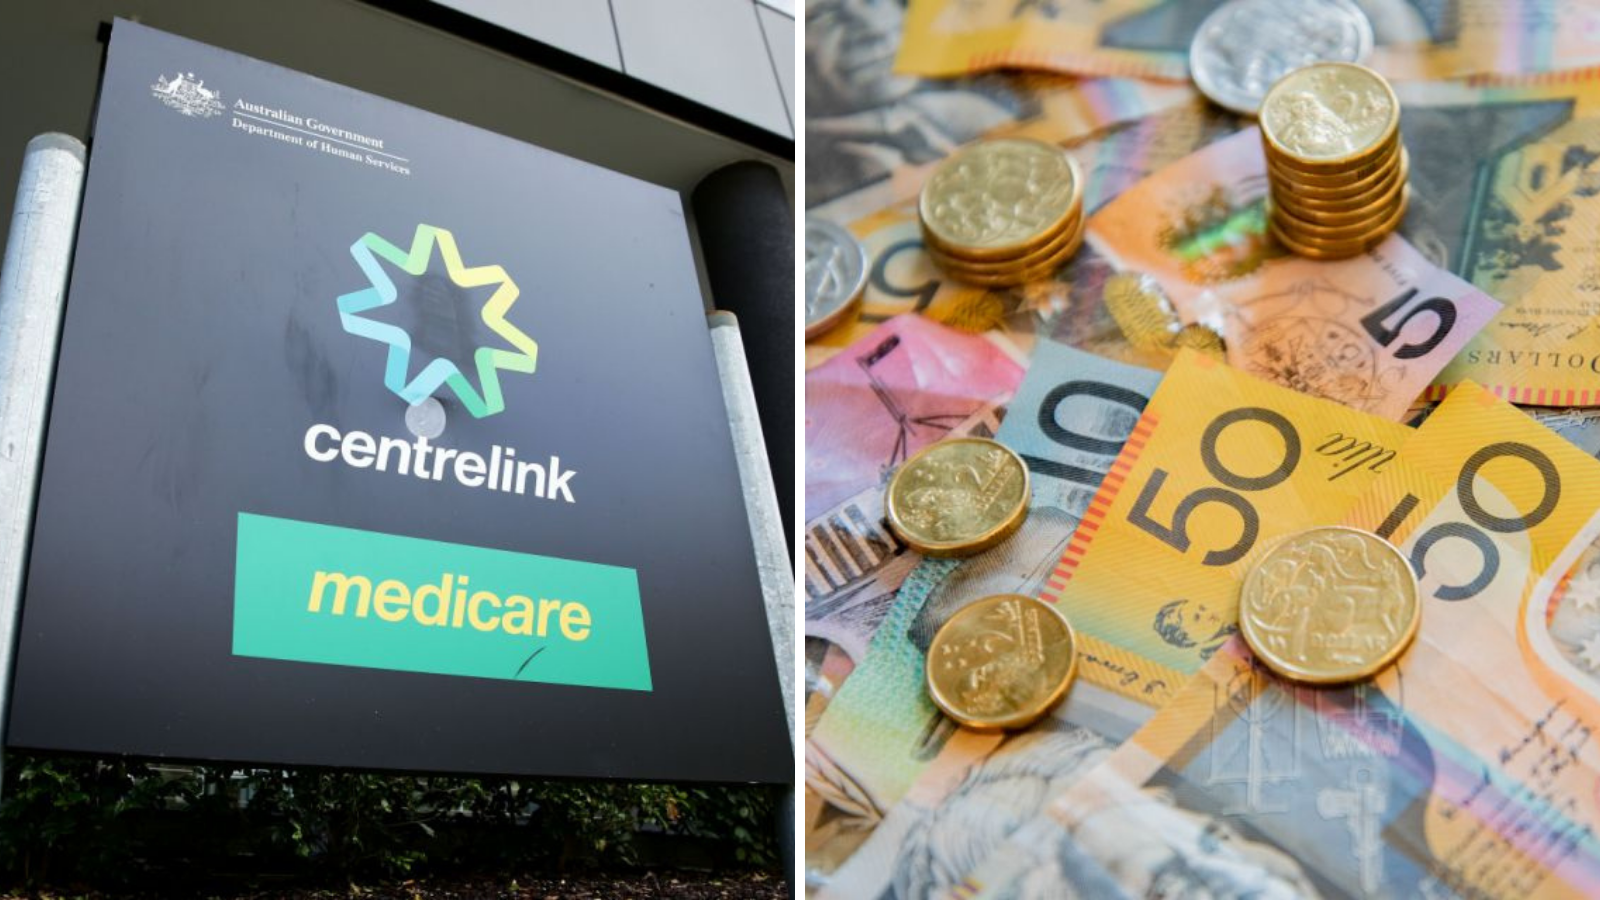 5-million-on-jobseeker-pensioners-to-see-centrelink-pay-rise